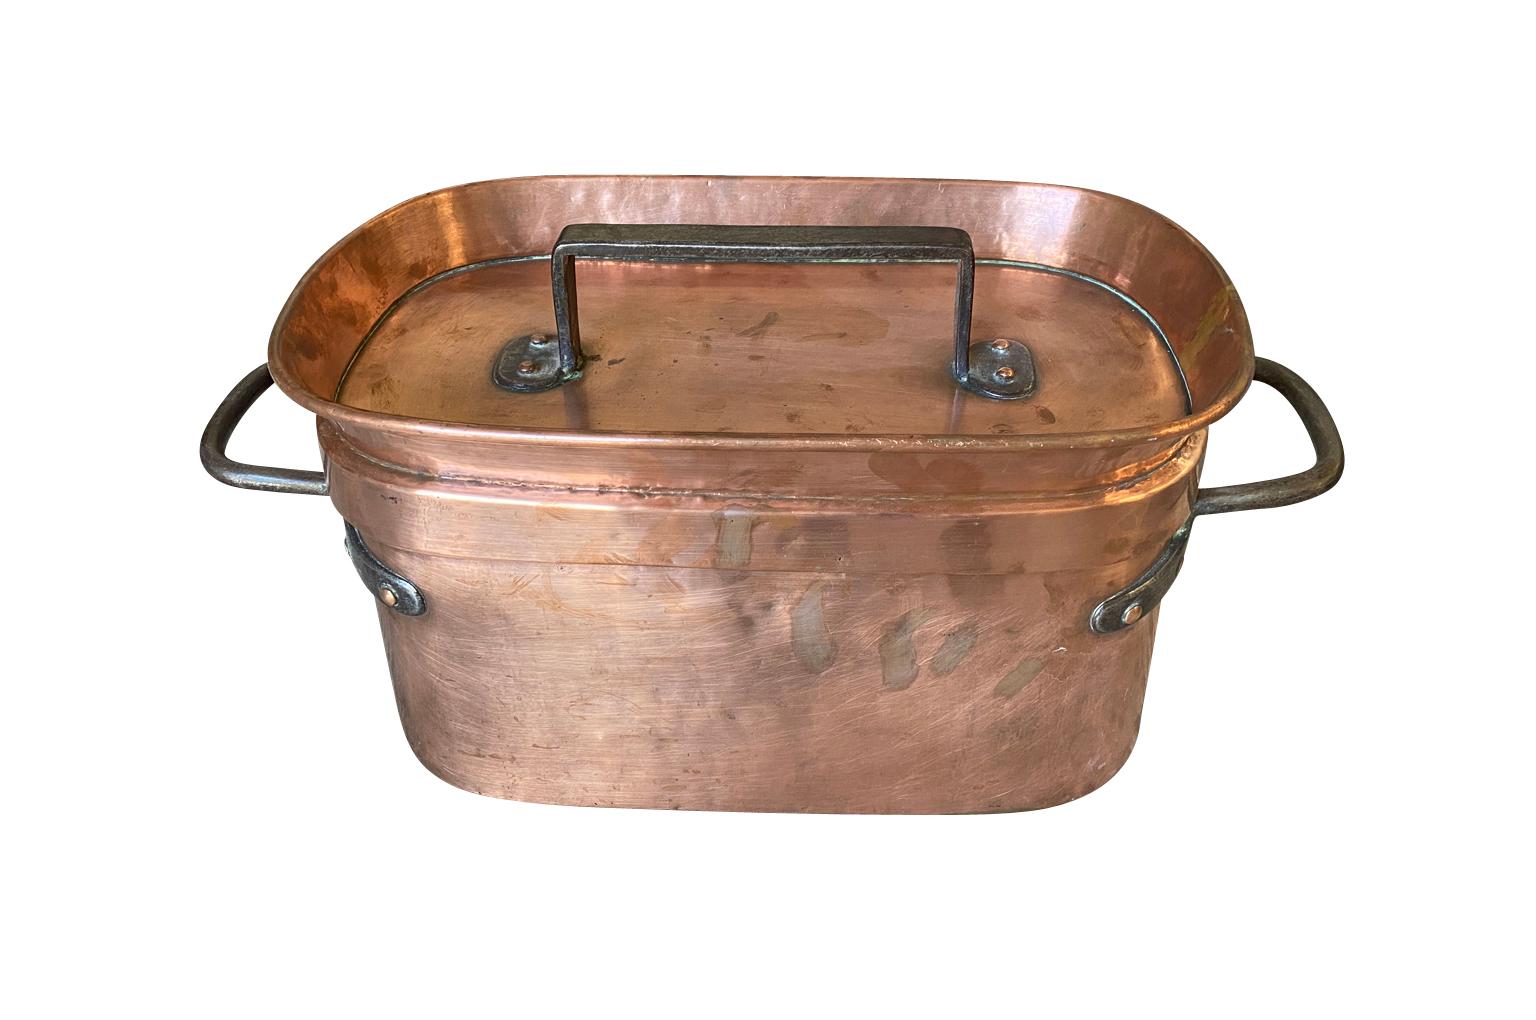 A wonderful 18th century copper pressure cooker from the Southwest of France. A great addition to any copperware collection.